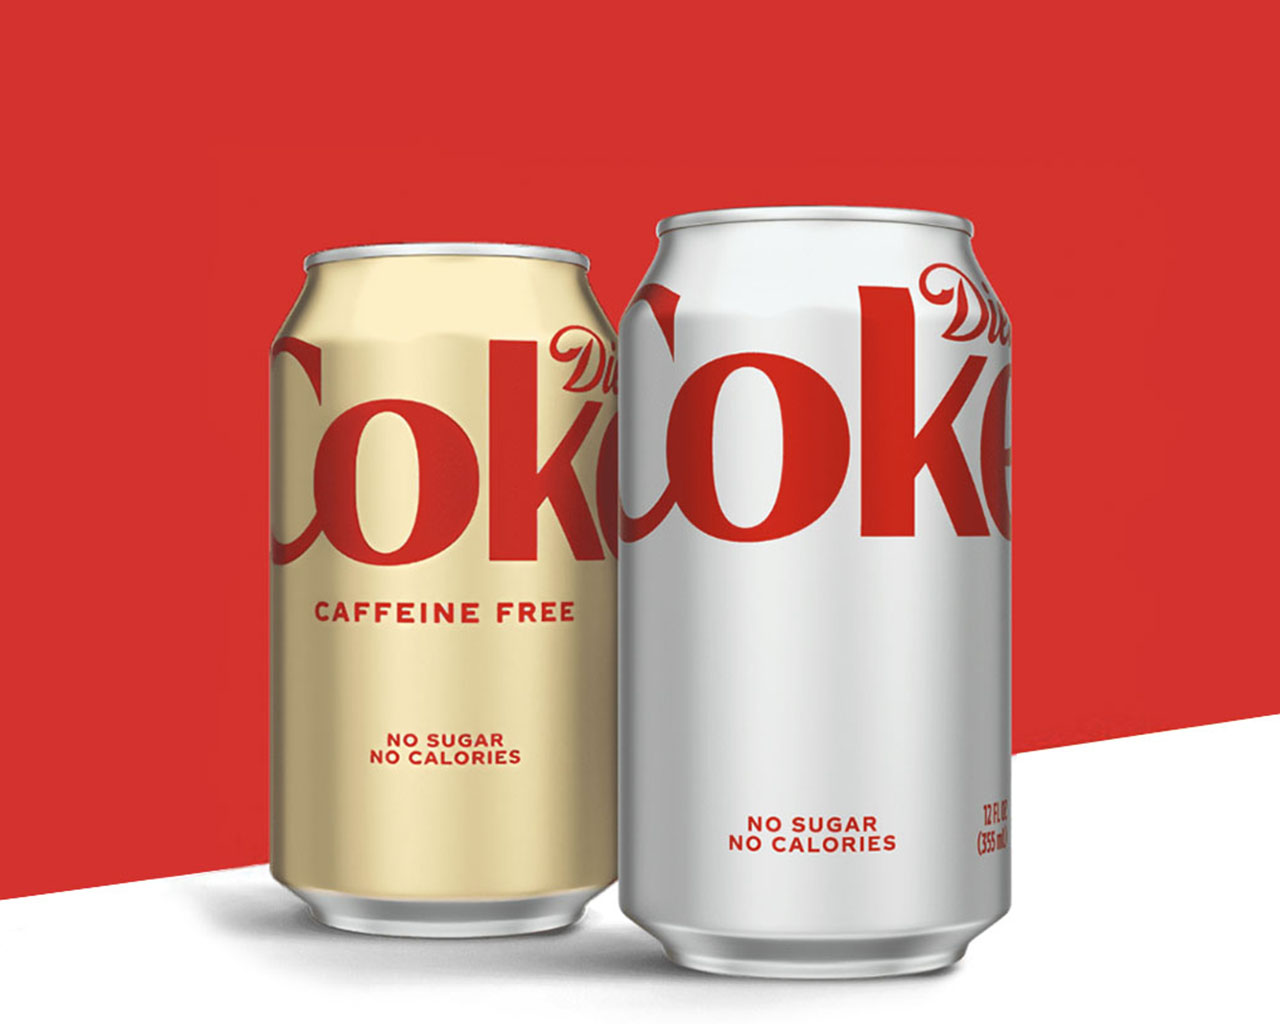 Two Diet Coke cans in front of a red and white background